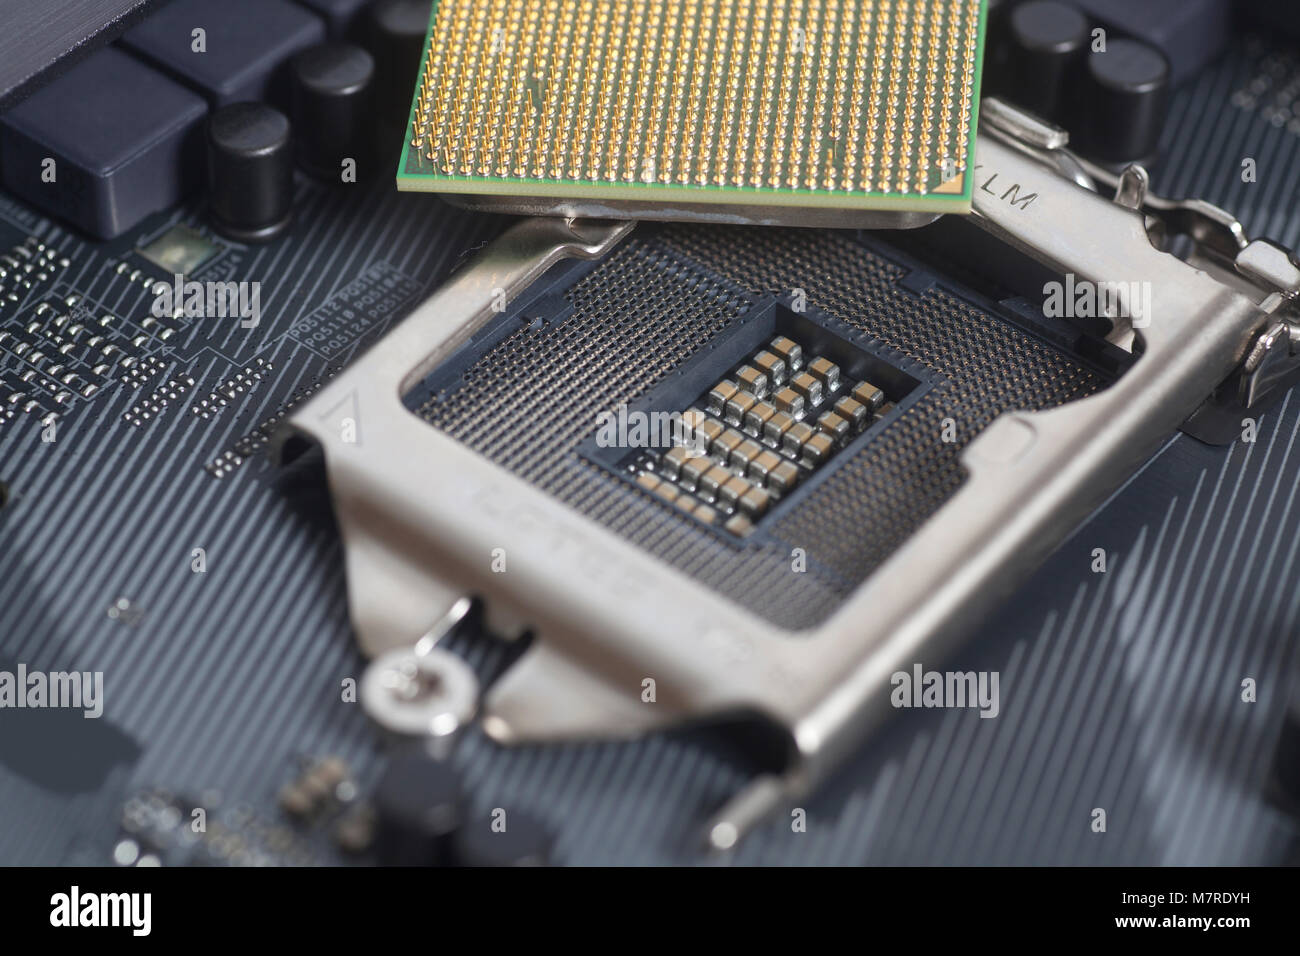 Intel LGA 1151 cpu socket on motherboard Computer PC with cpu processor close up Stock Photo